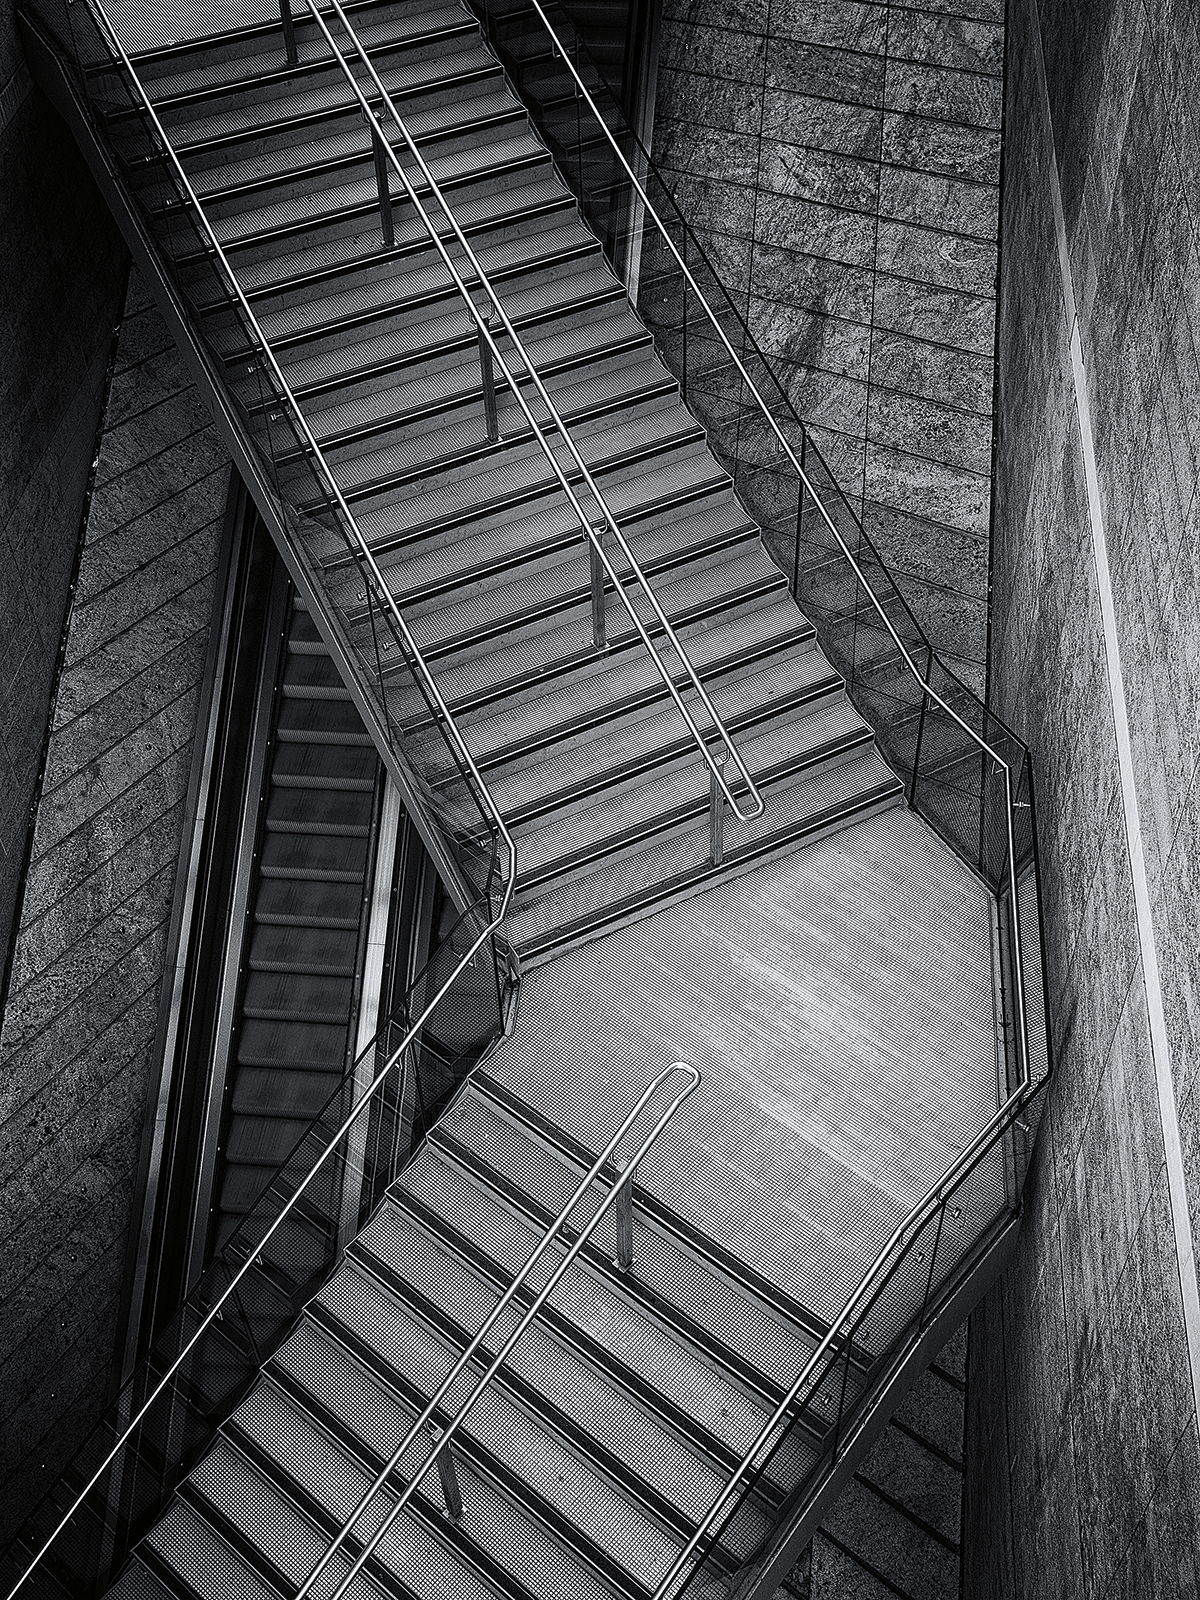 Photographing staircases